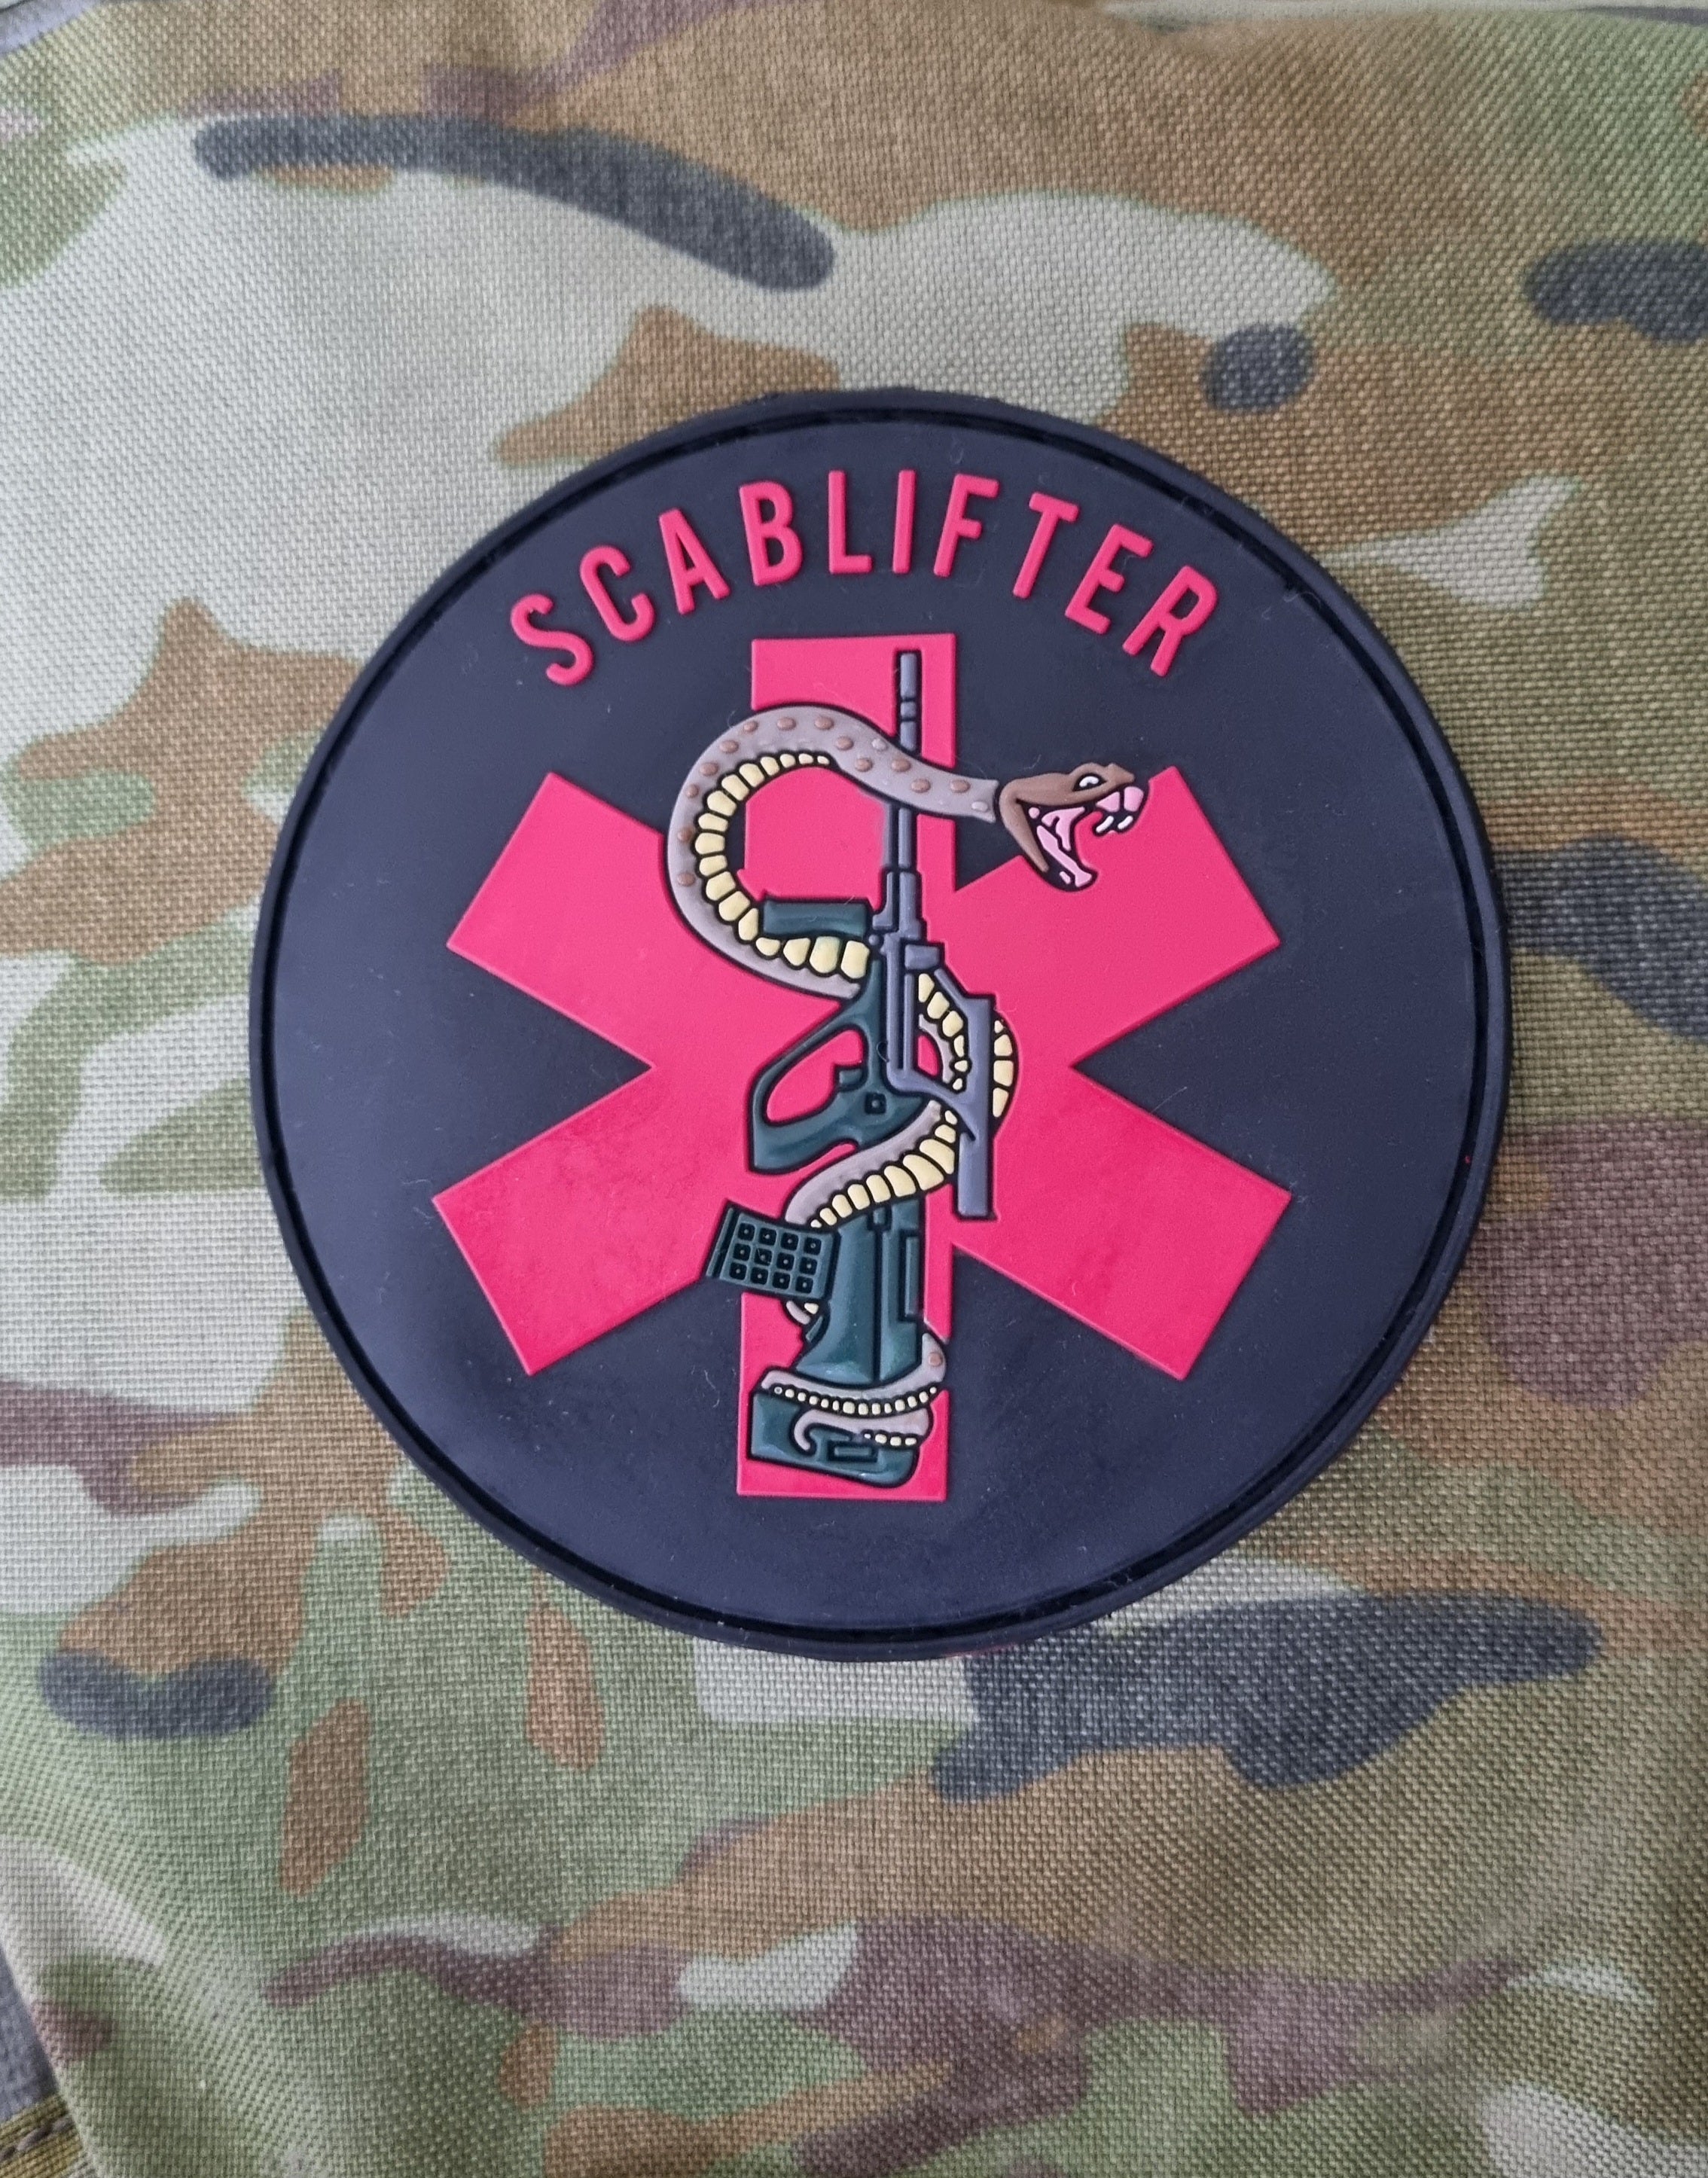 Scablifter Patch